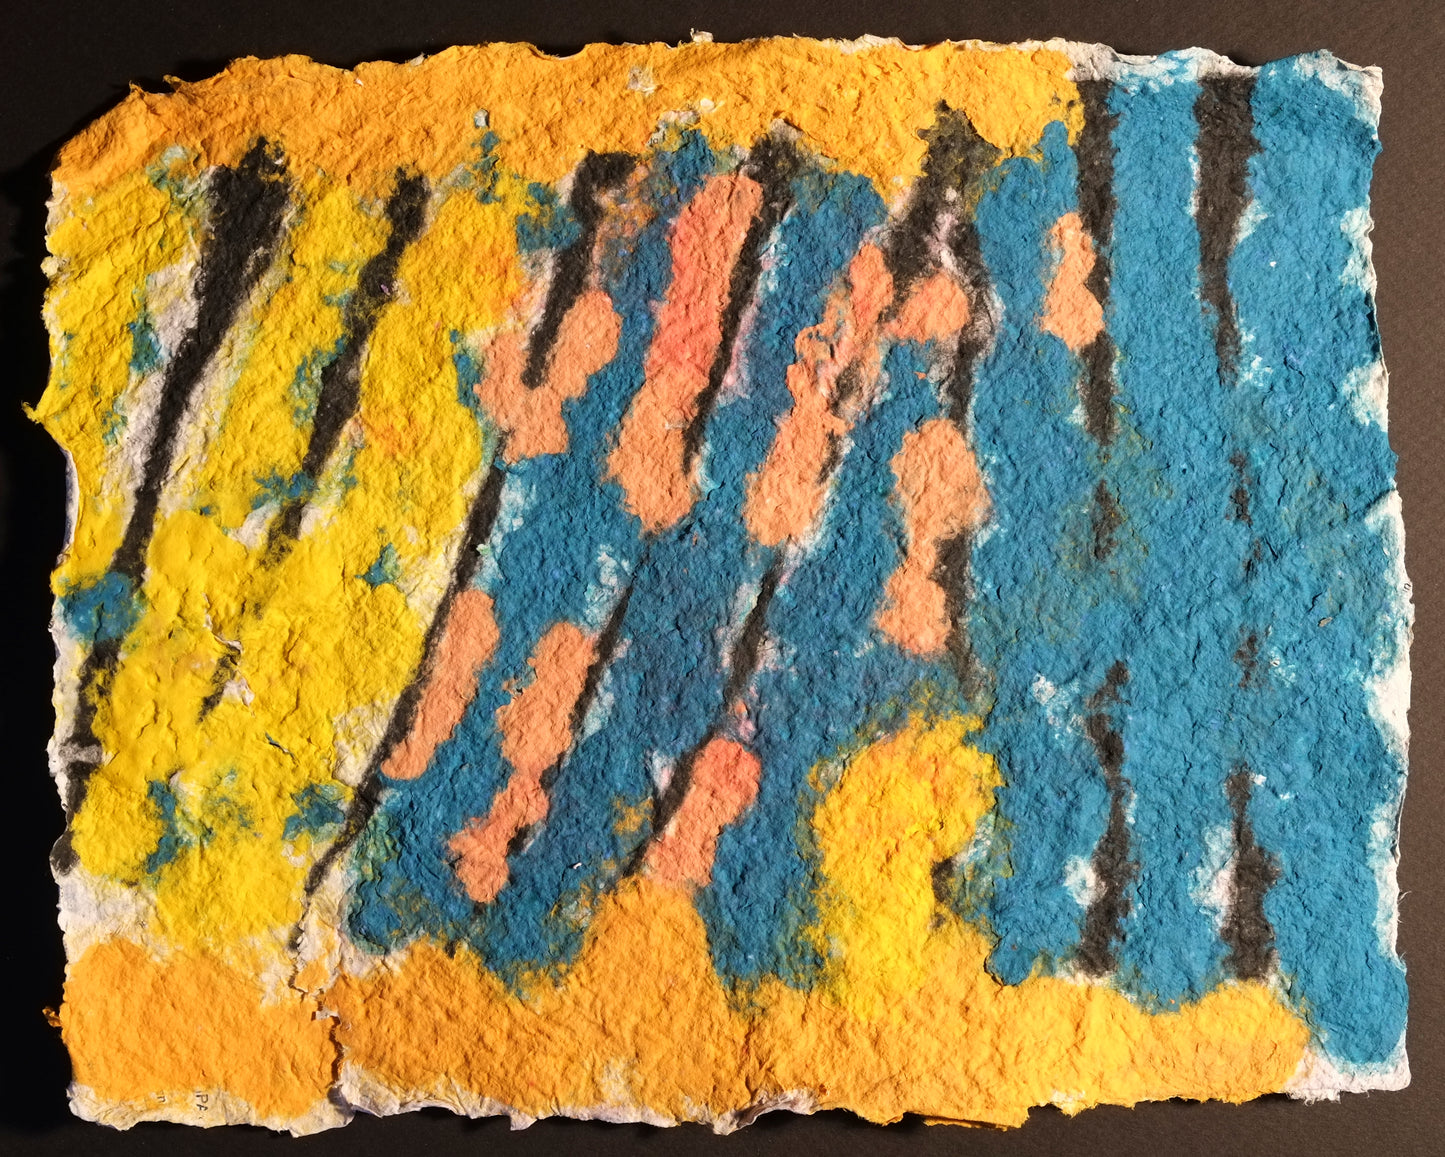 Pigment on recycled paper artwork with black vertical marks against a blue and golden yellow background